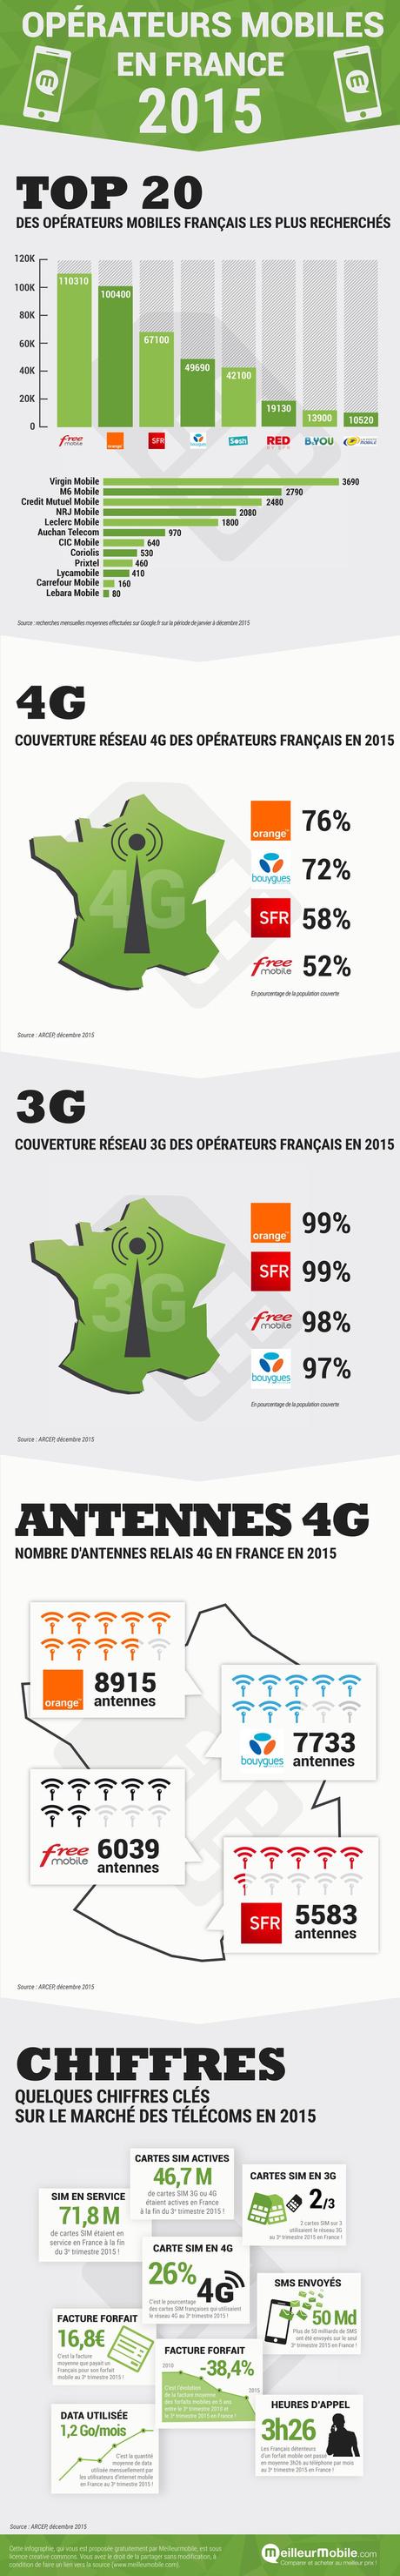 infographie-operateurs-mobiles-france-2015